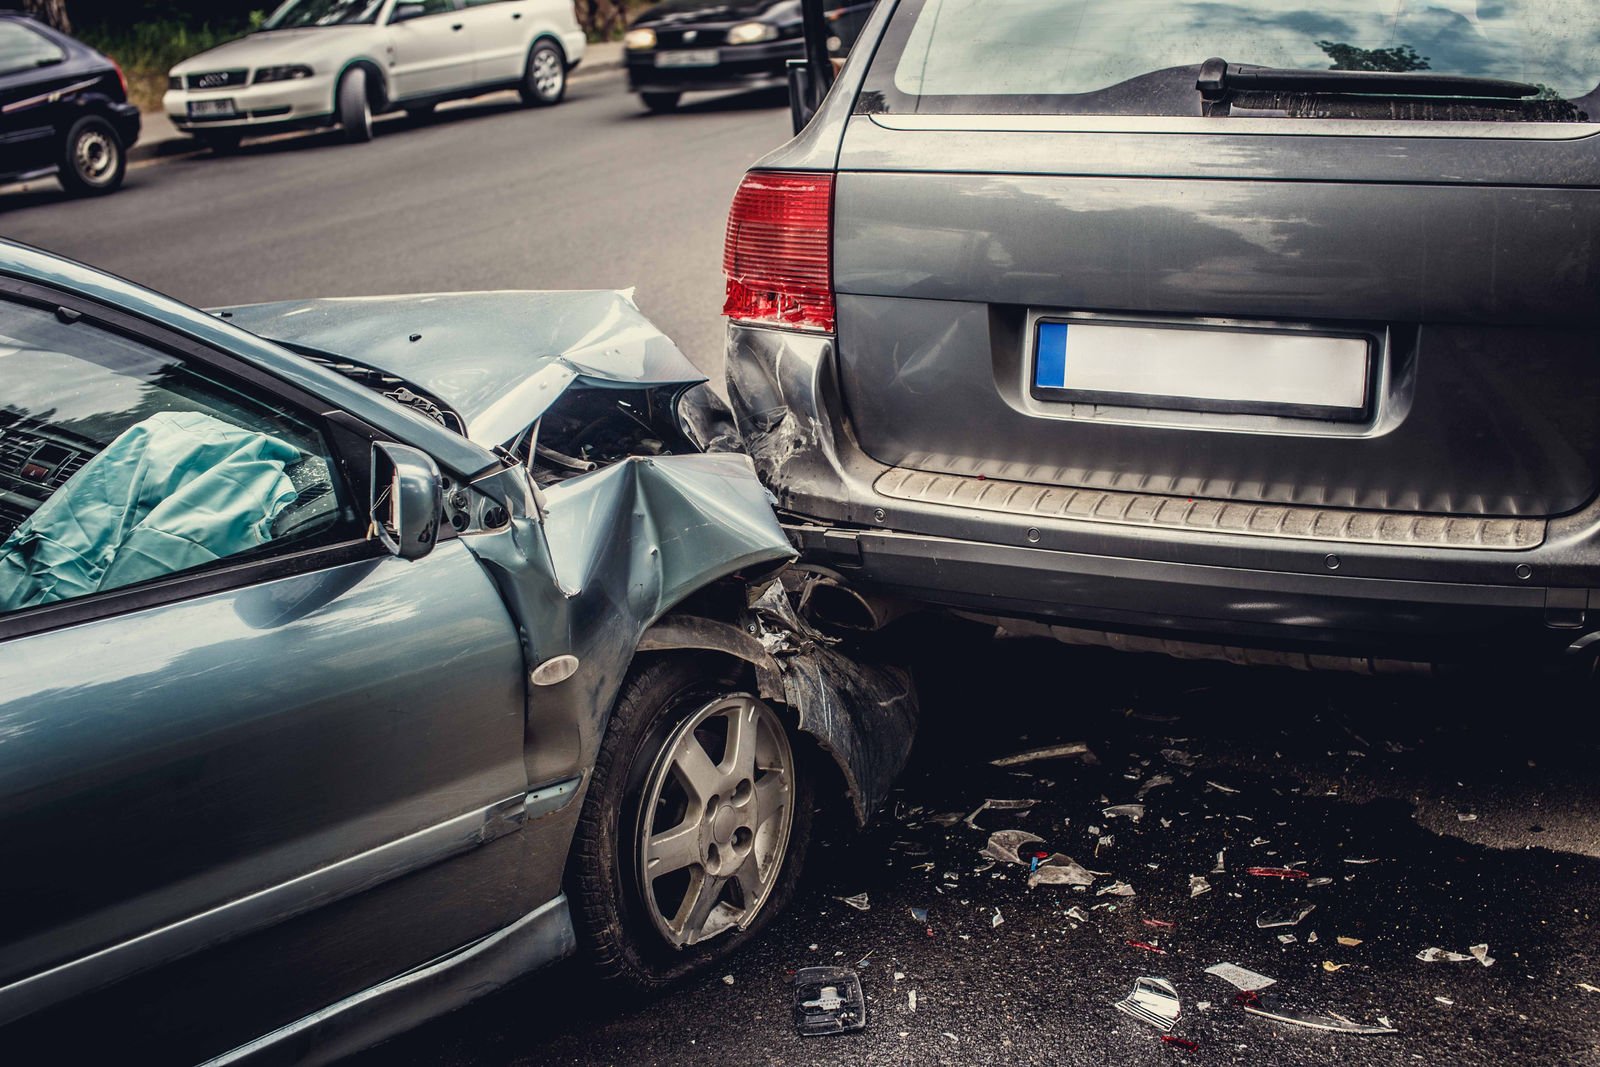 What happens when a car insurance company finds out about a car accident?